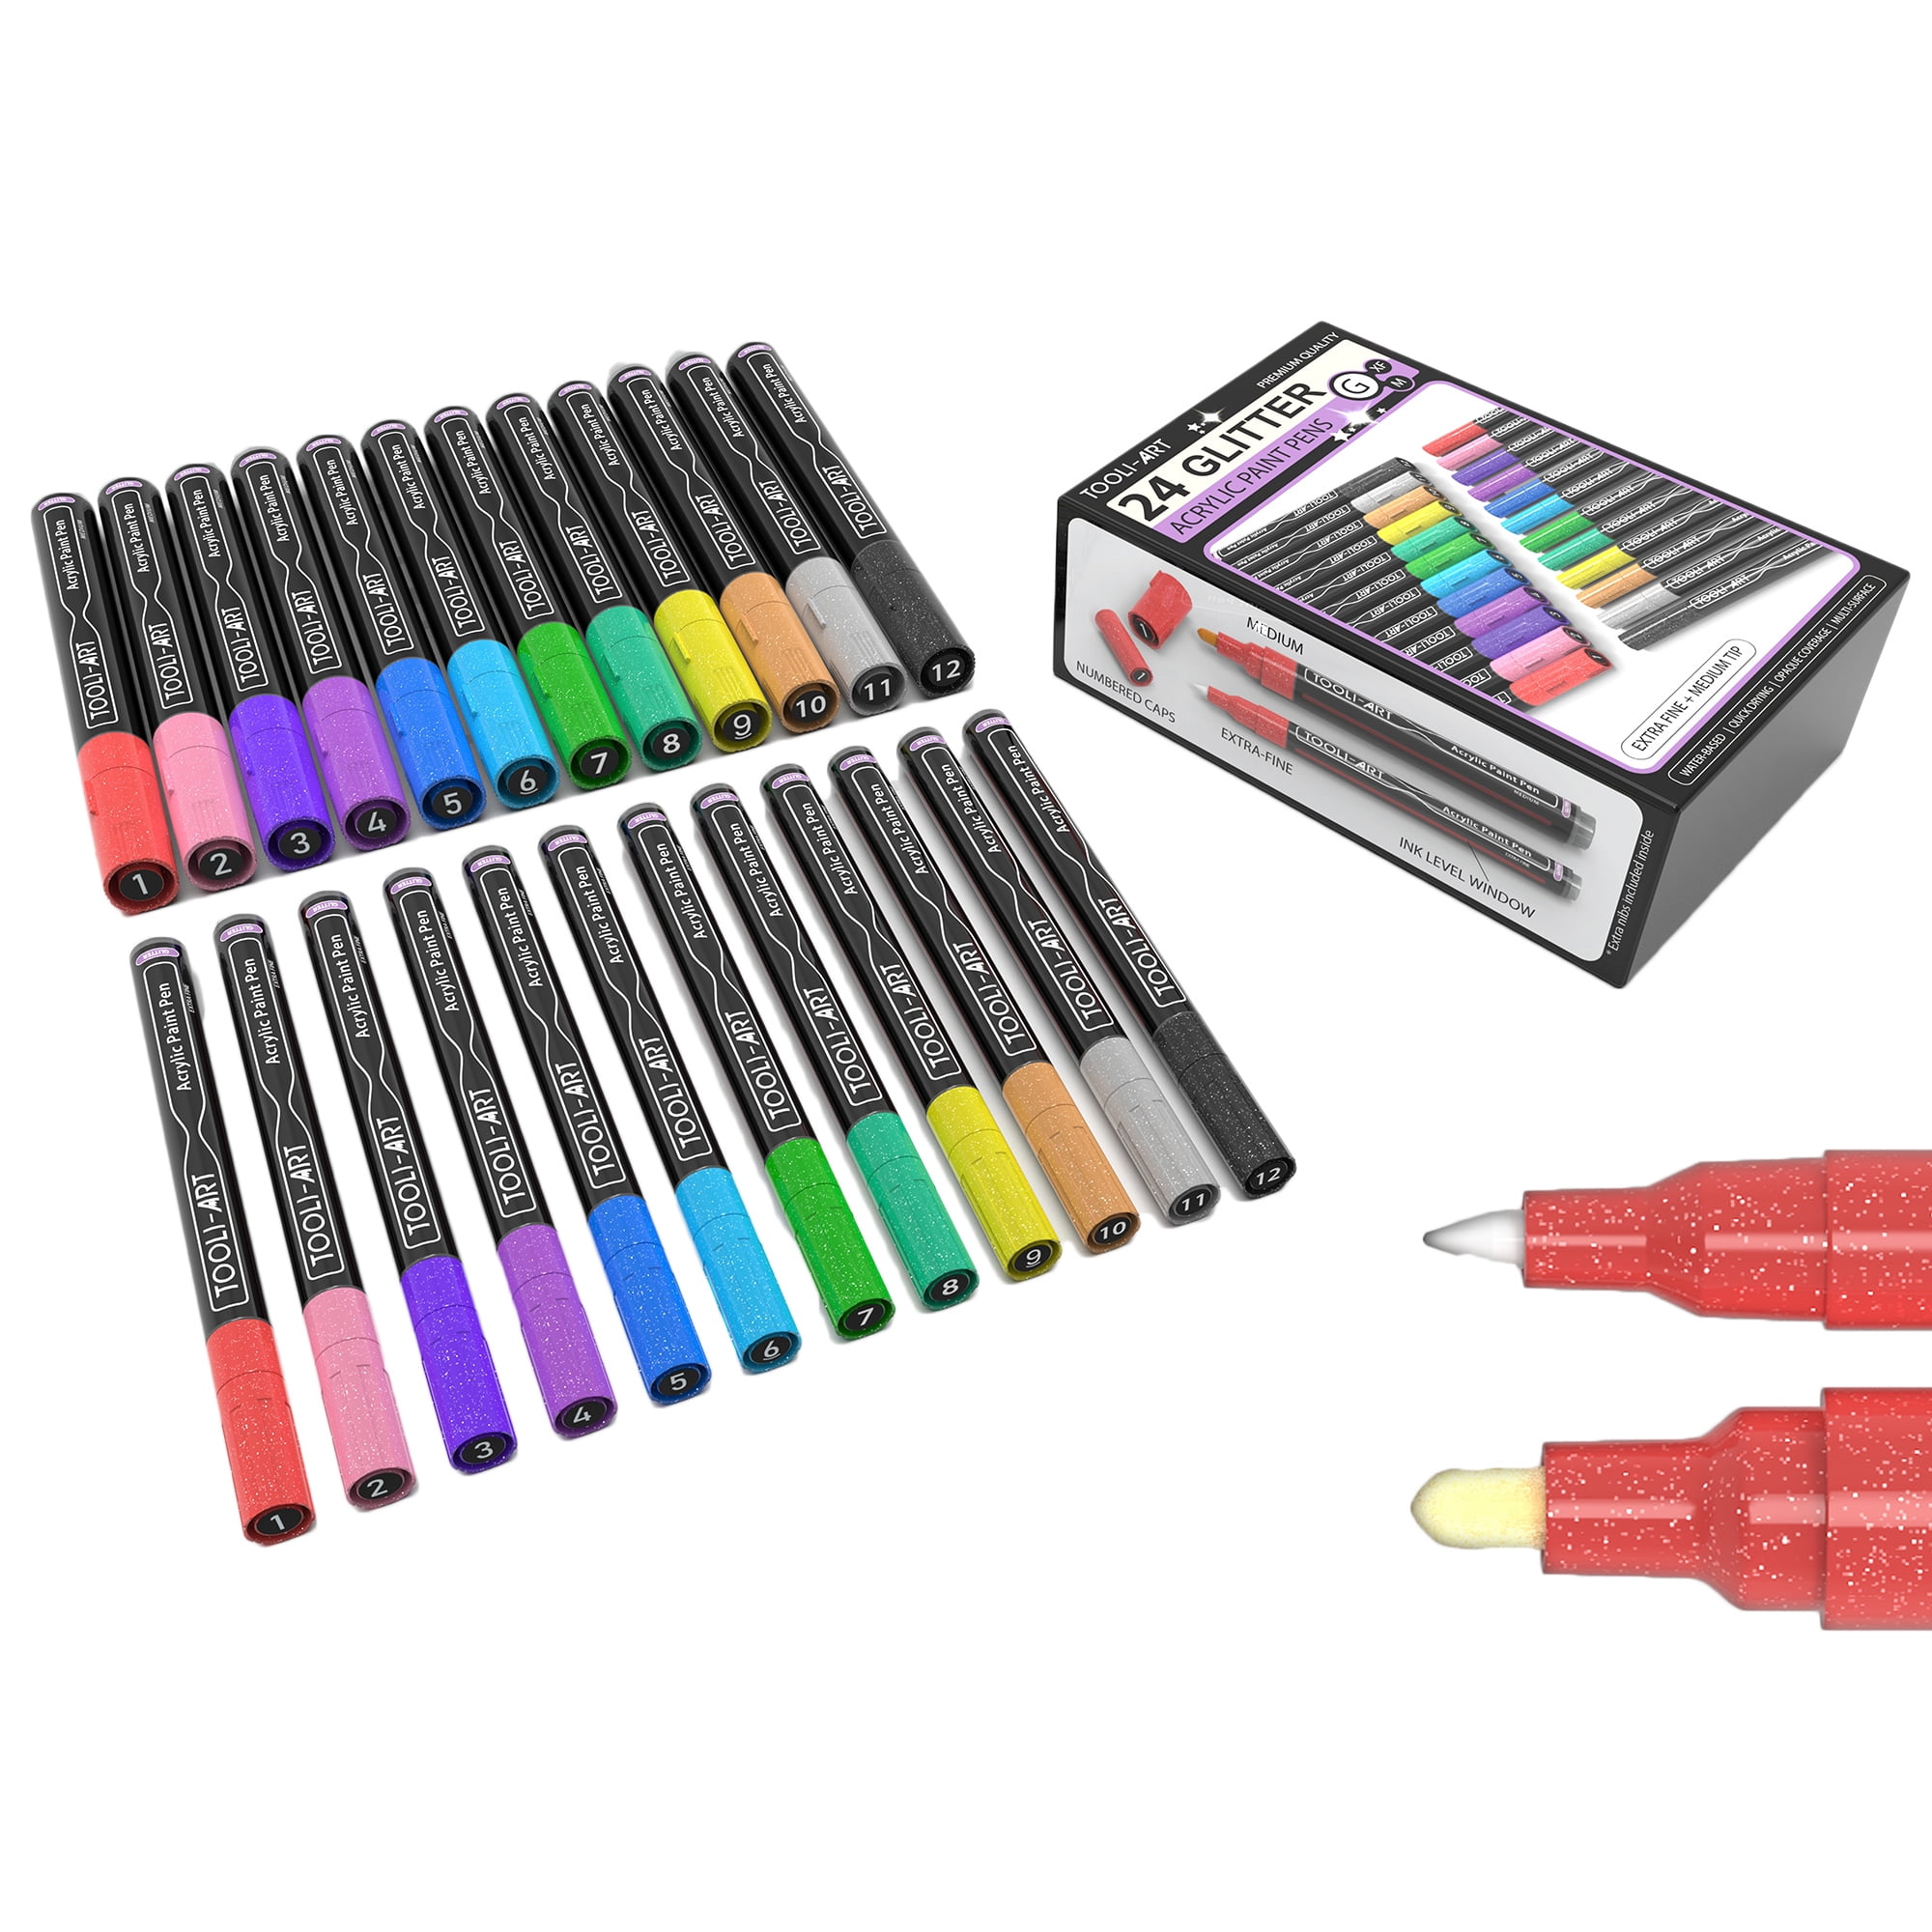 Acrylic Paint Pen Set of 32 - Extra Fine & Medium Tip Point with 8 Metallic  Markers - Rock, Glass, Wood & Fabric Painting Art Supplies, Adults & Kids  Arts Craft Kit